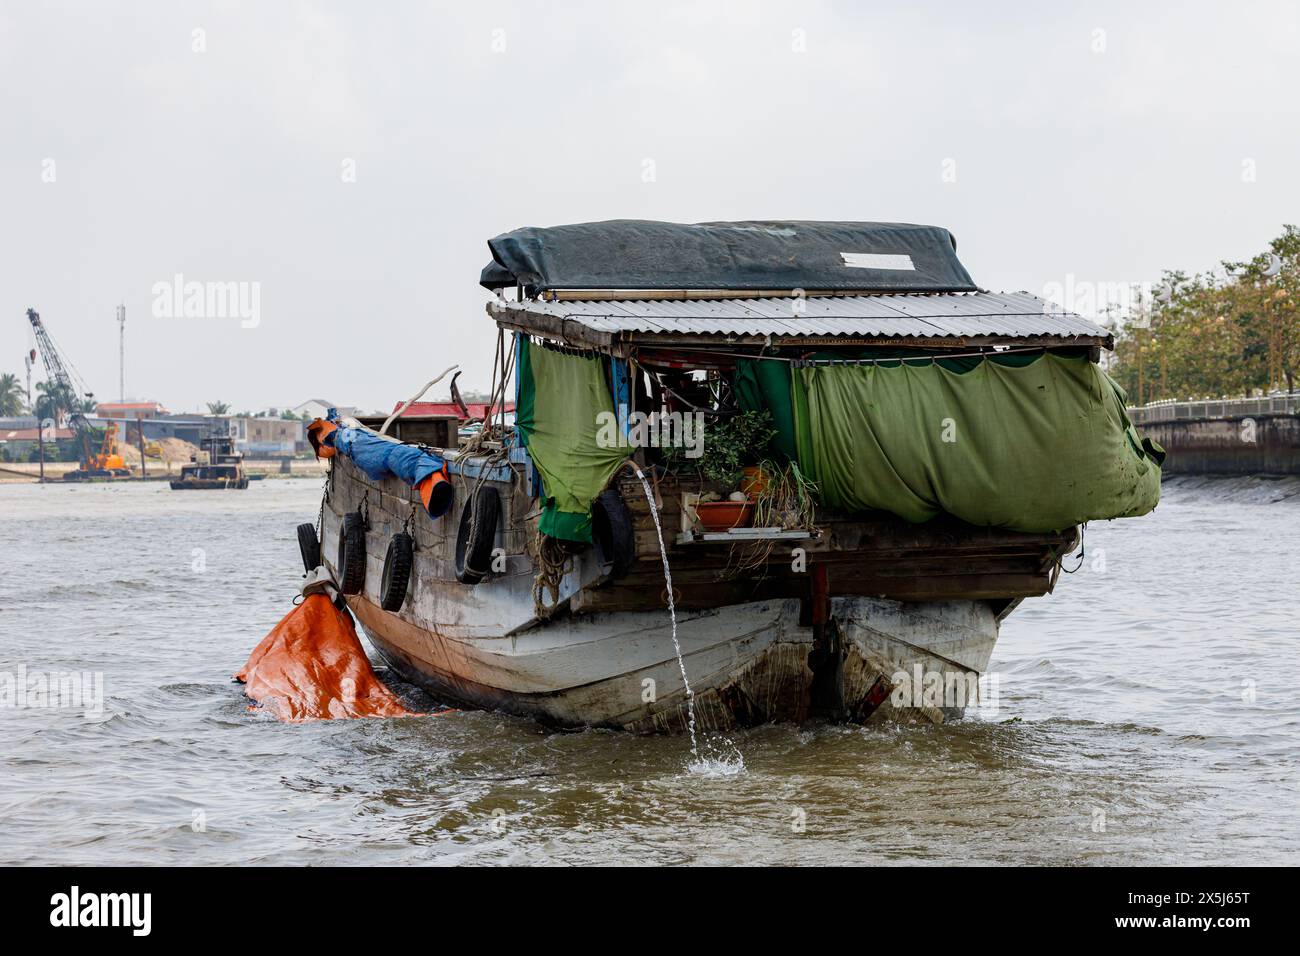 Barche sul fiume Mekong a Cai Rang in Vietnam Foto Stock